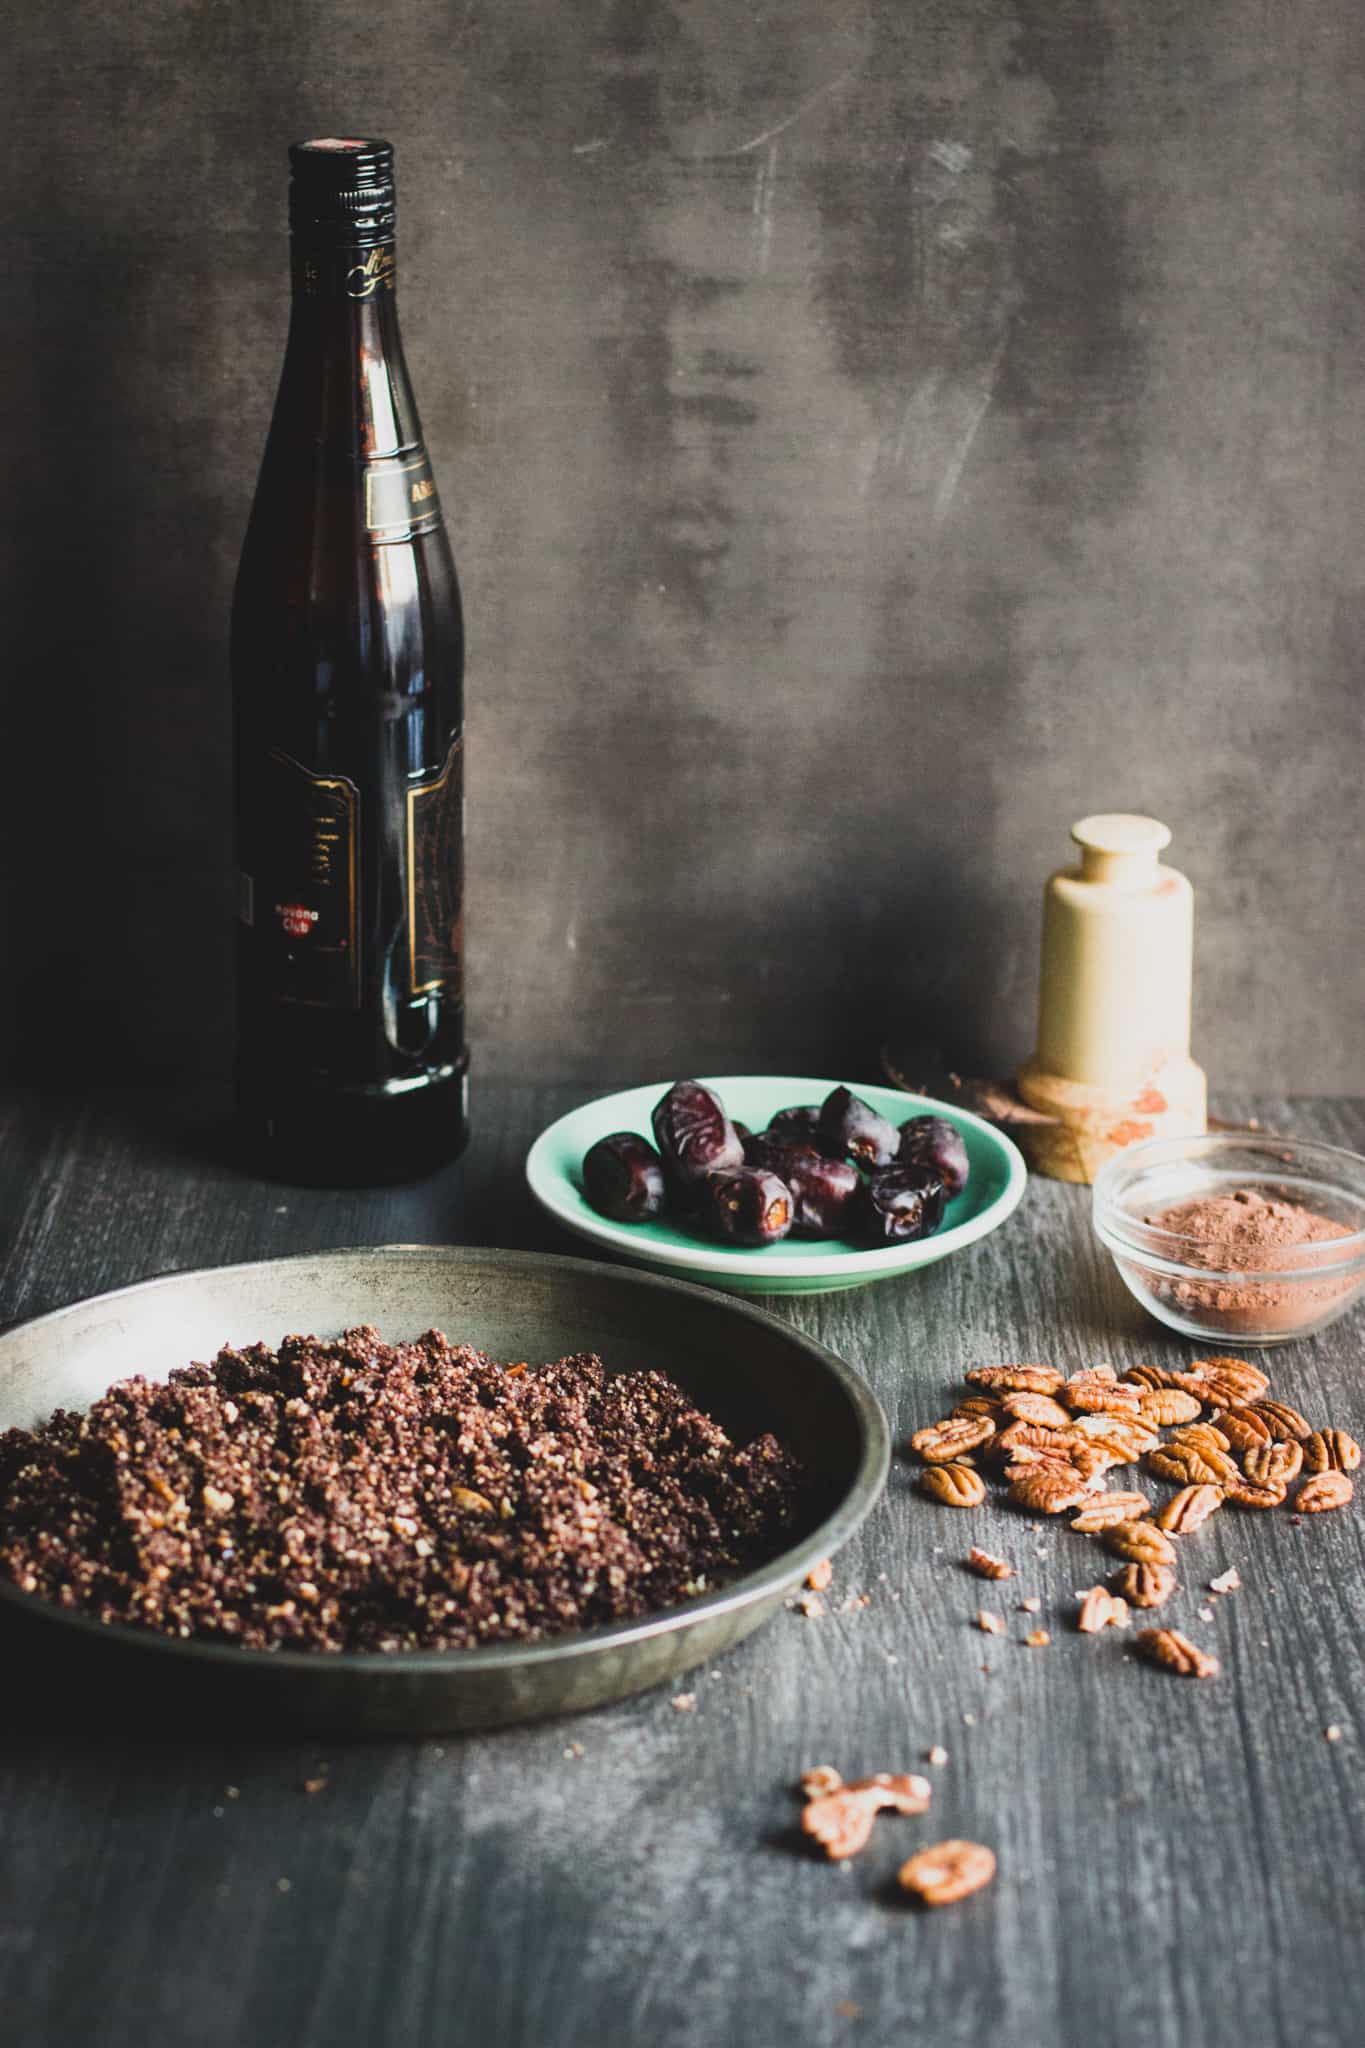 Chocolate pecan pie dough in a metallic plate in front of a bottle of rhum and next dried figs on small plate, cocoa powder in a tiny glass mixing bowl, and almonds and walnuts spread on the surface